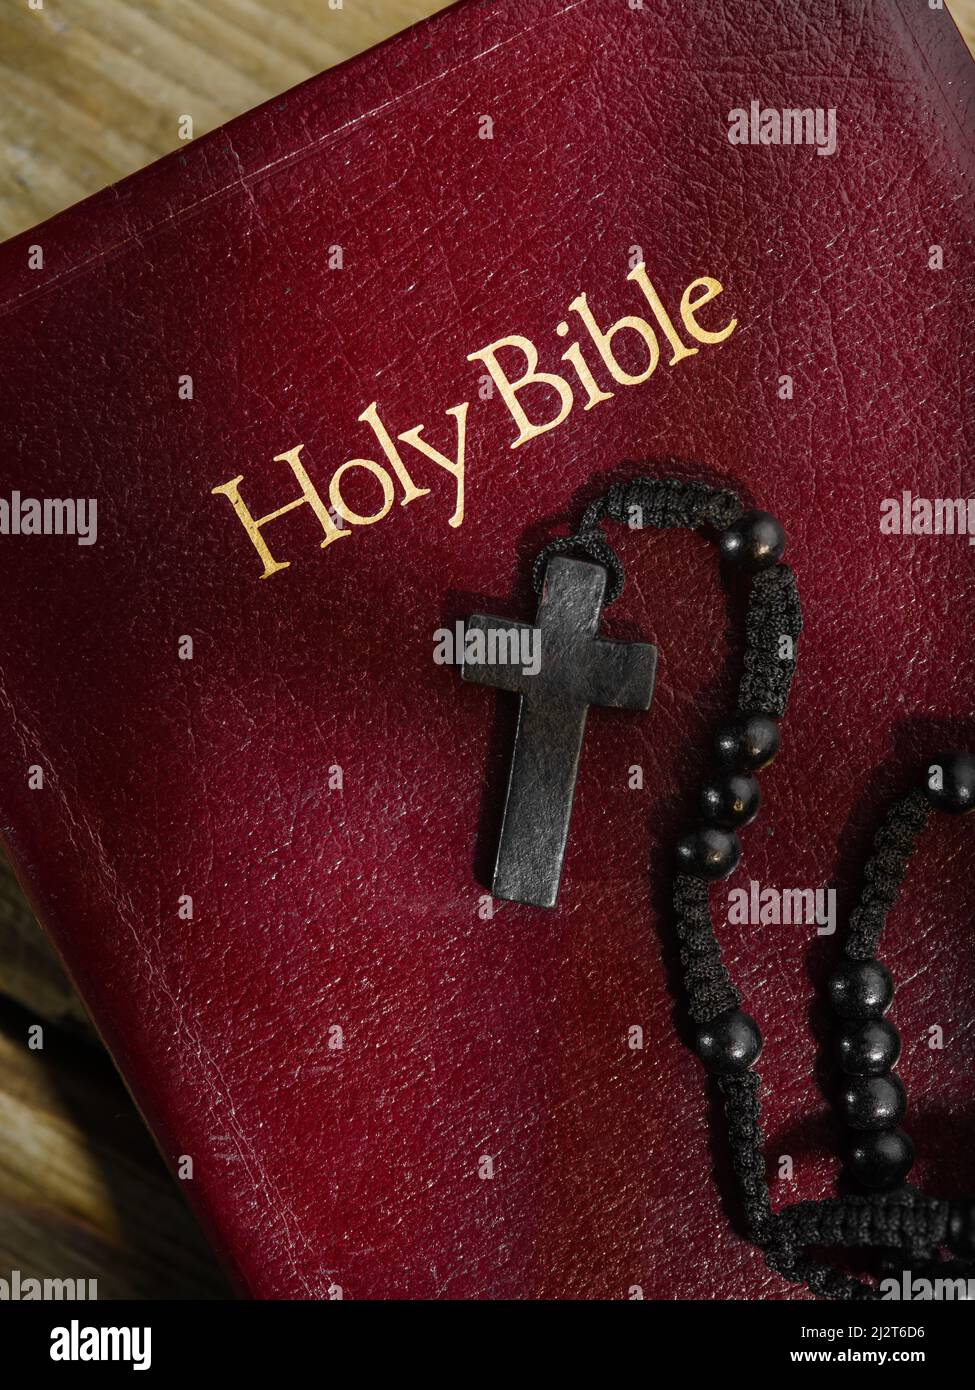 Against the background of a red book with golden letters - the Holy Bible - there are rosaries with a cross. Close-up. There are no people in the phot Stock Photo